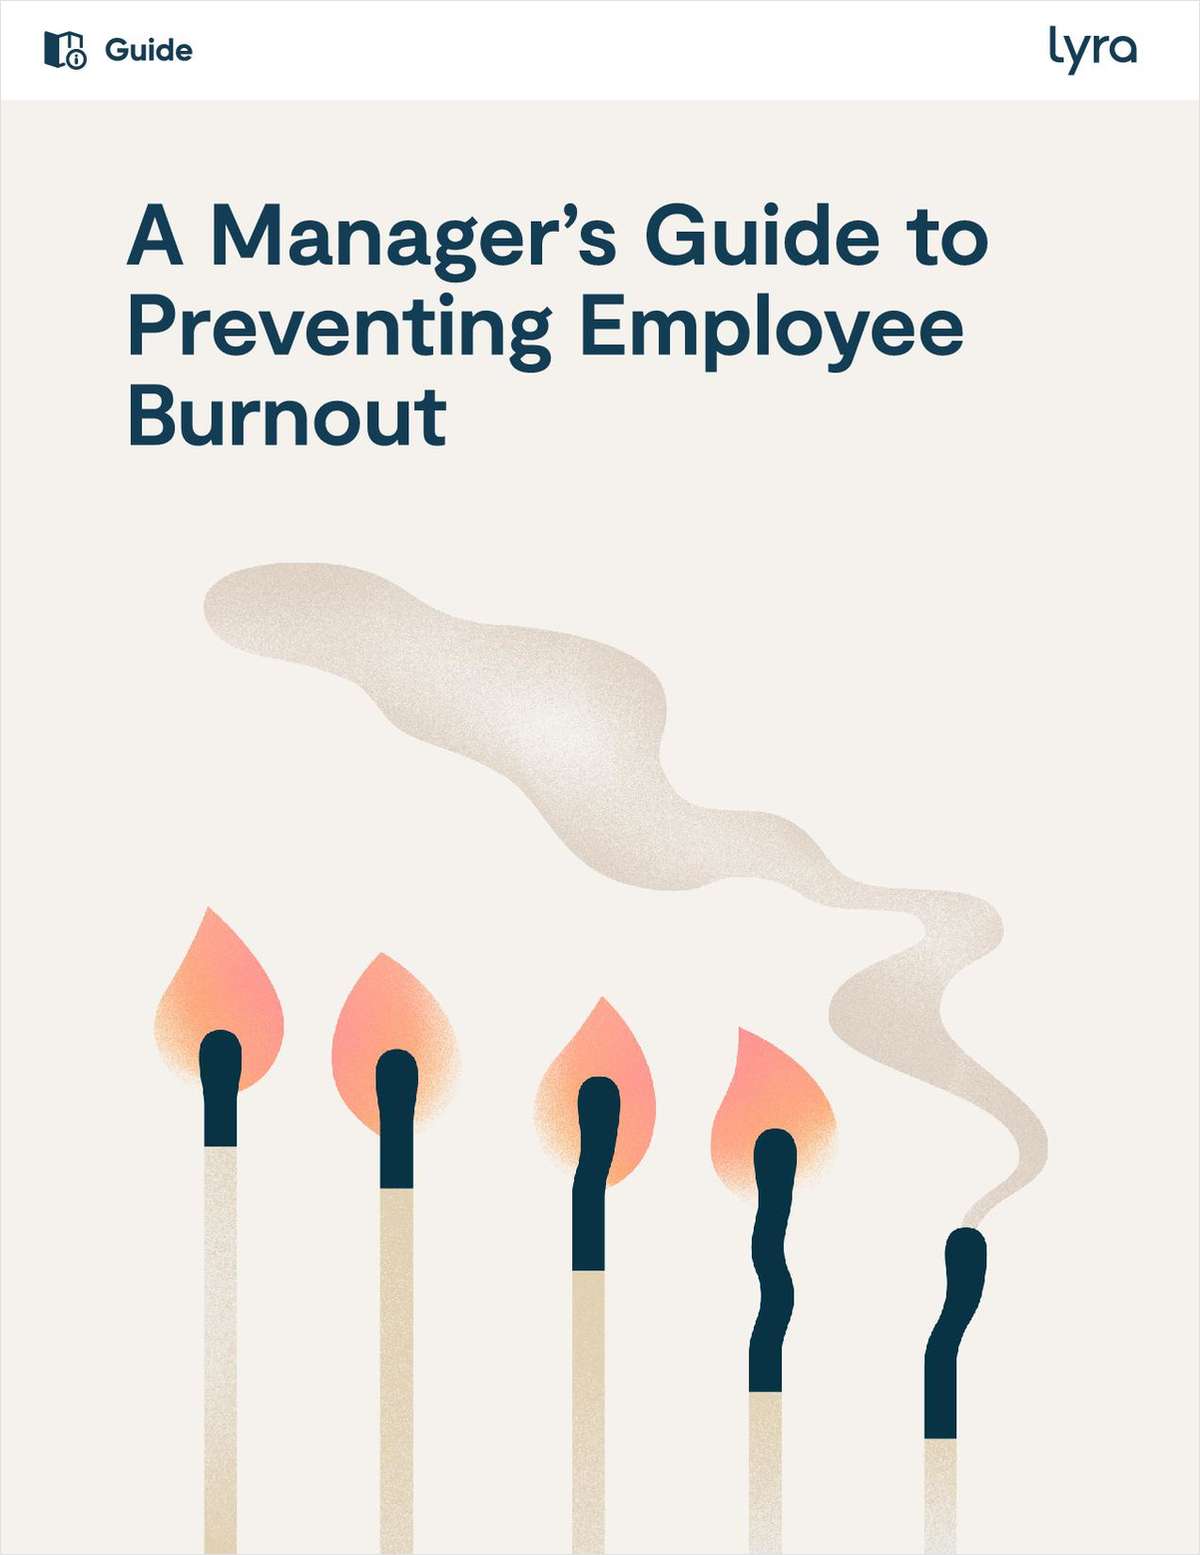 The Manager's Guide to Preventing Burnout